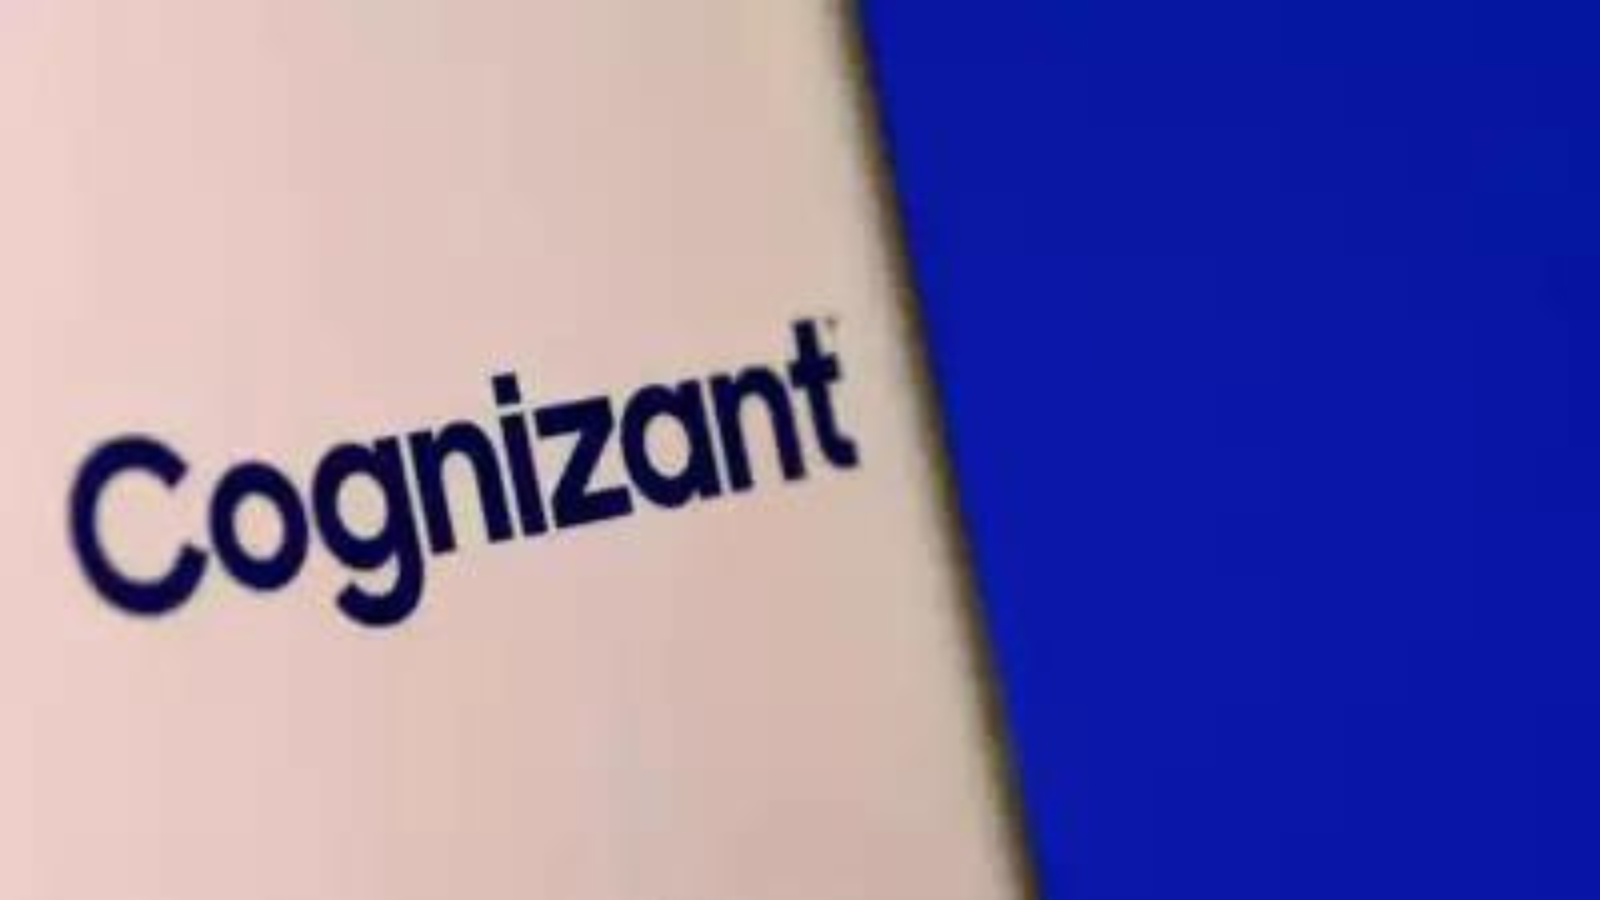 Cognizant Press Releases, Company News | Cognizant Technology Solutions